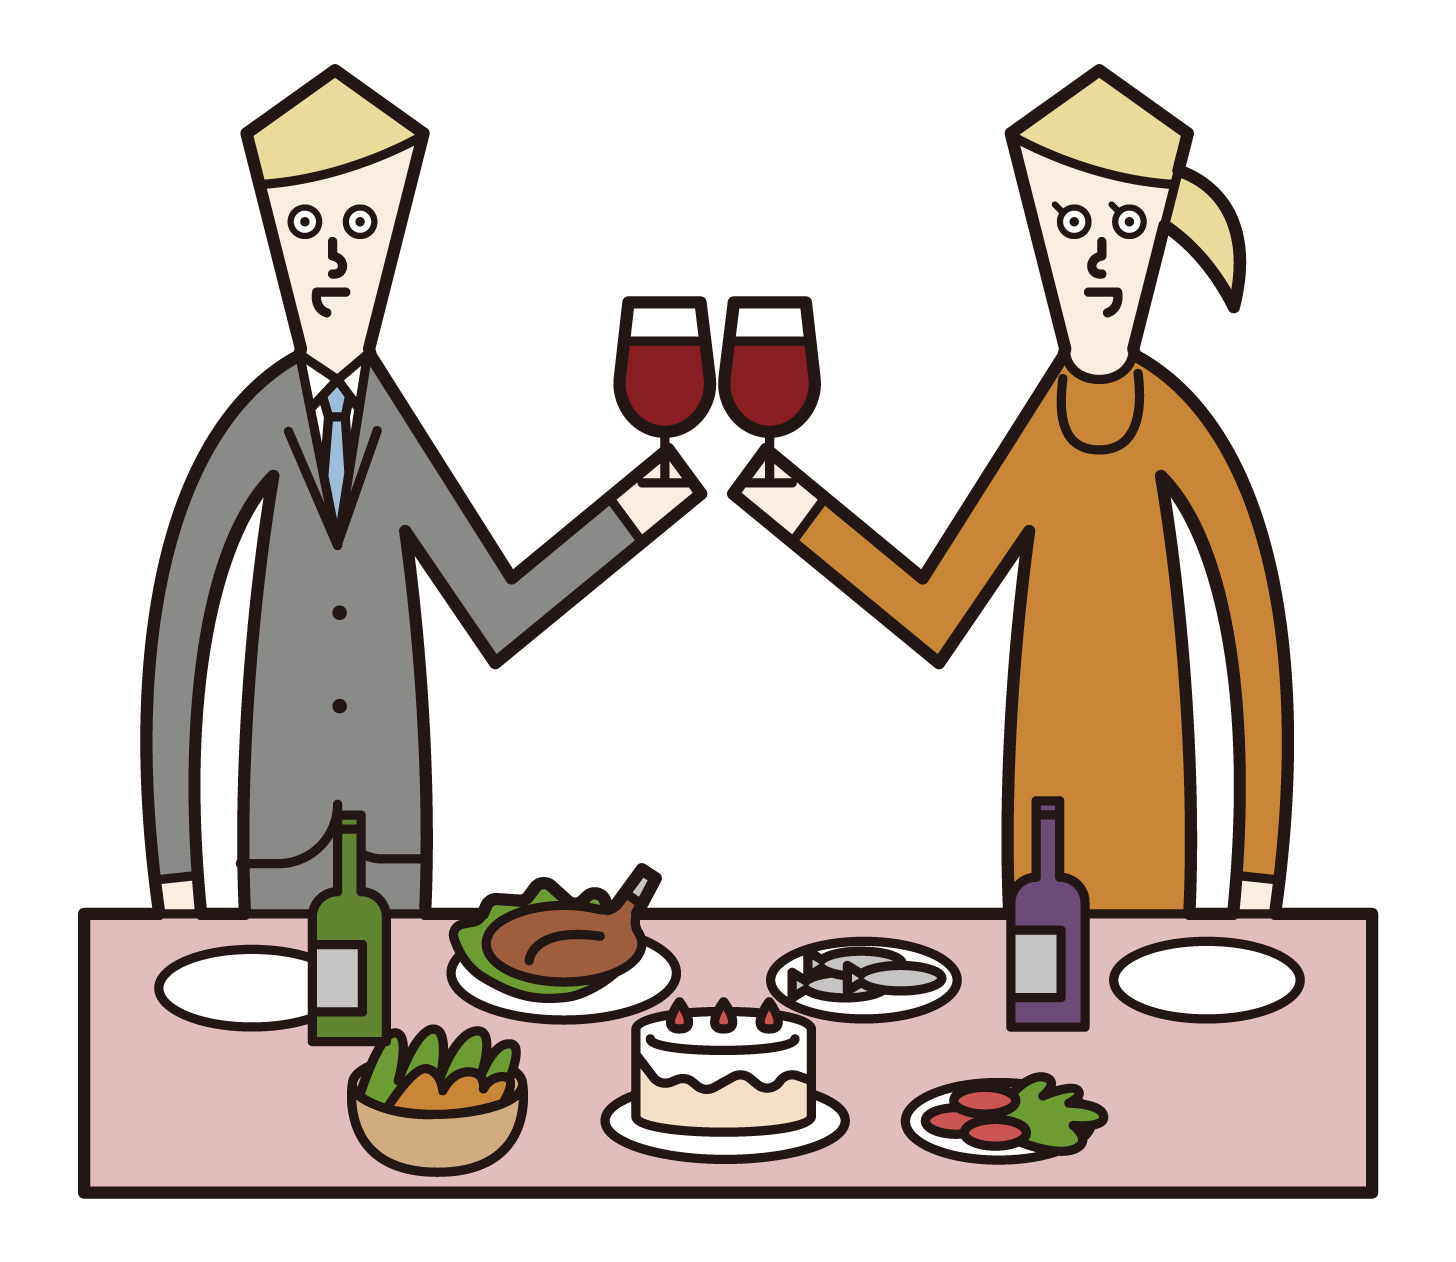 Illustrations of people (men and women) toasting at a party